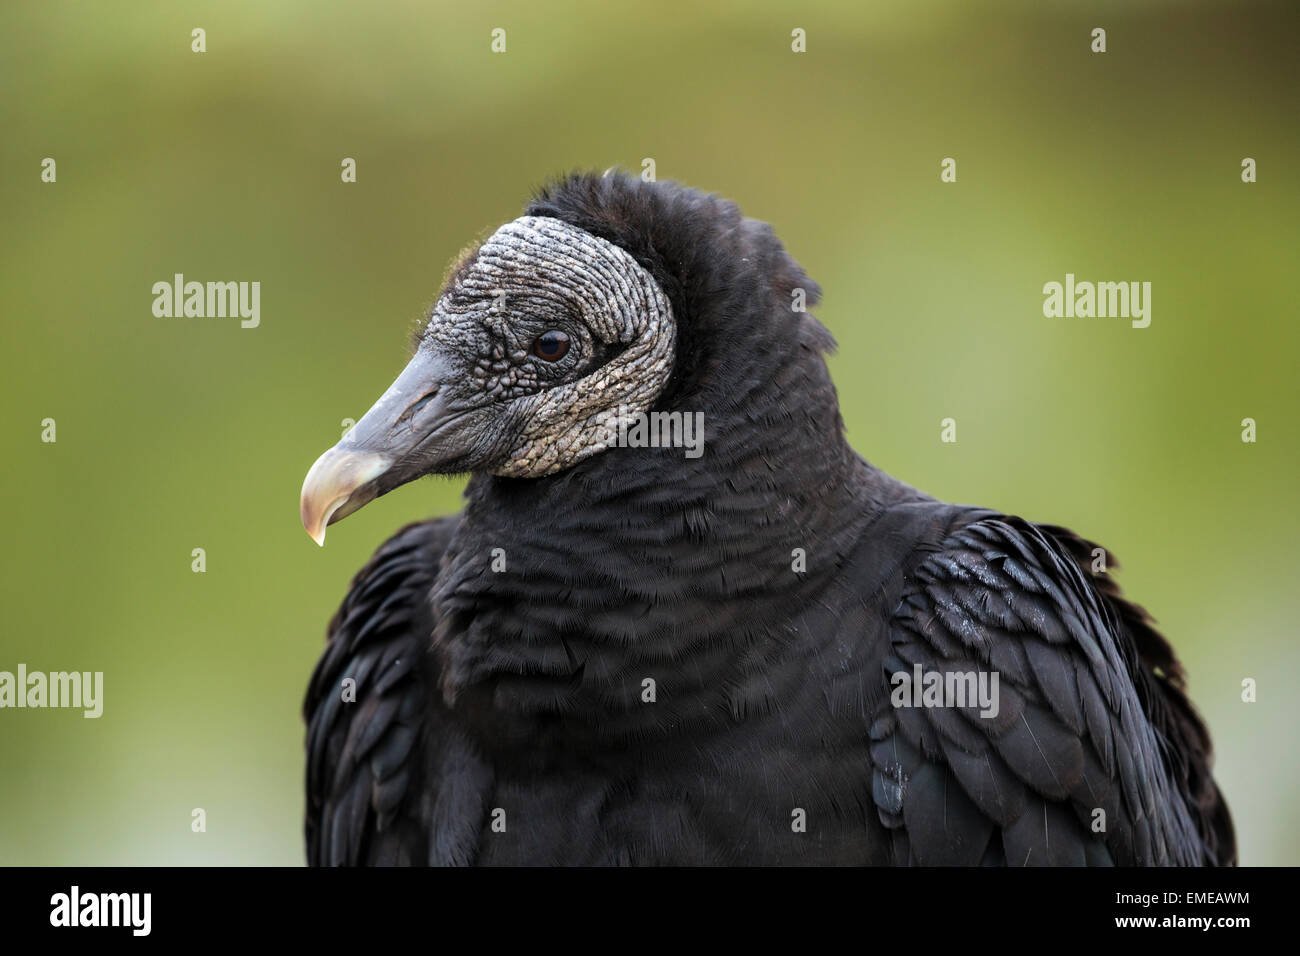 Portrait of a Black vulture (Coragyps atratus) along the Anhinga Trail in the Florida Everglades National Park. Stock Photo